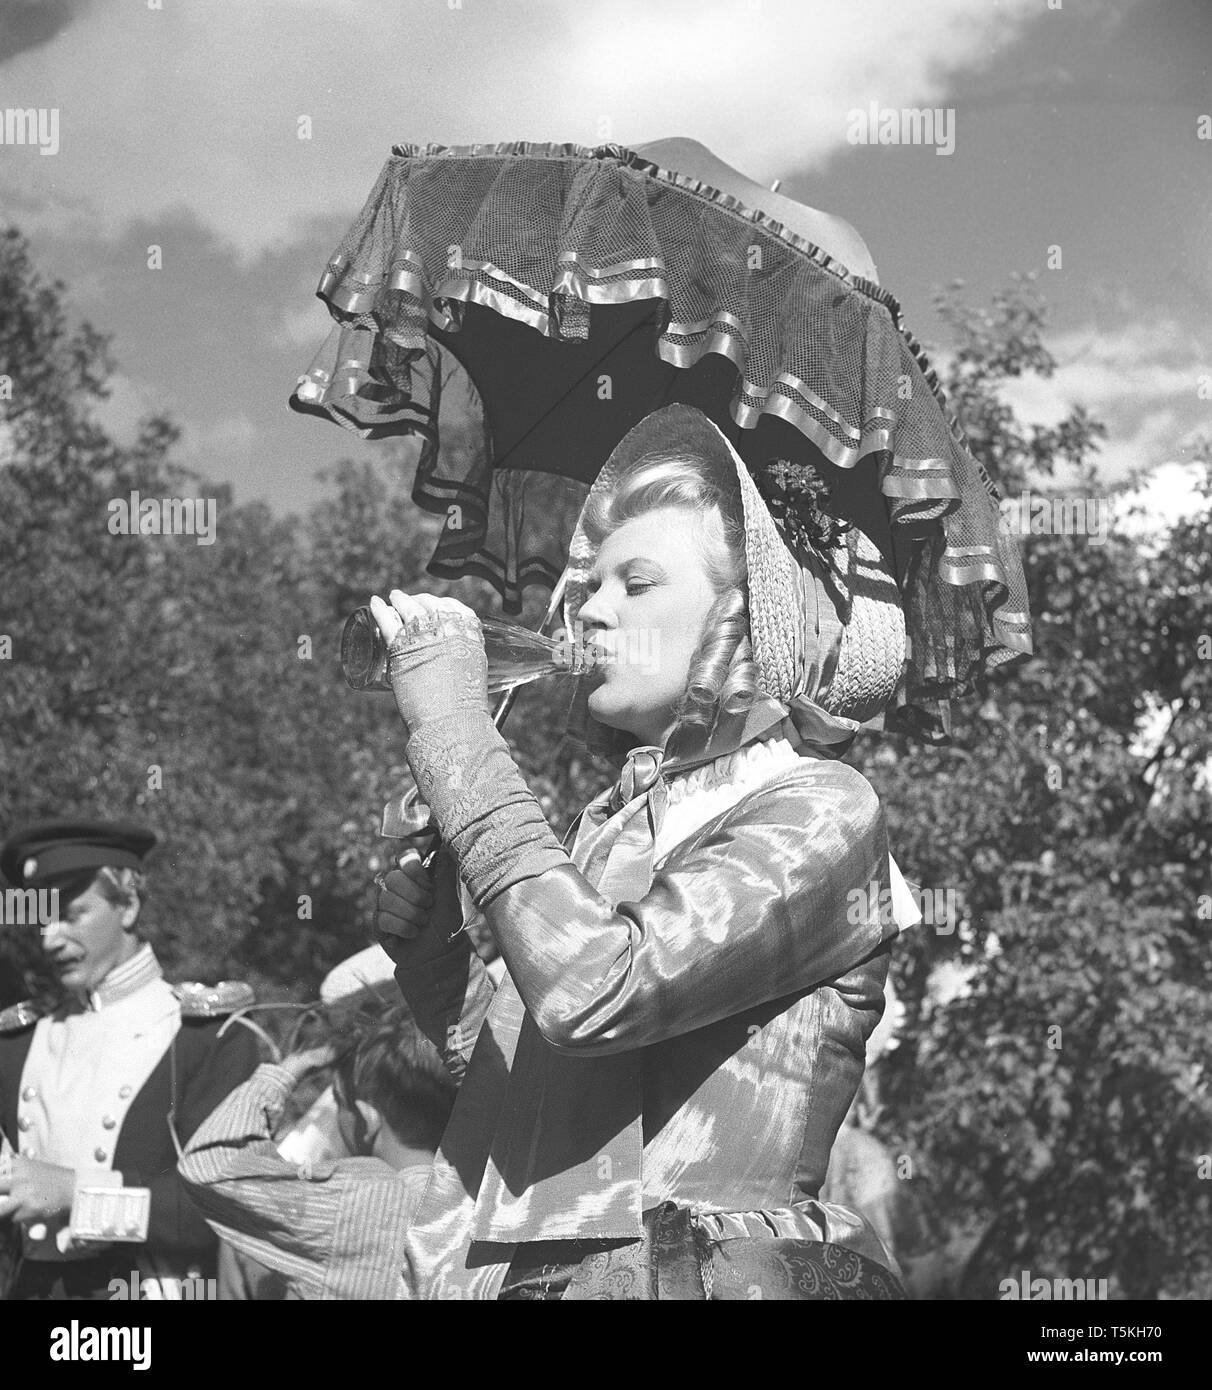 1940s actress. A young woman on a movie set dressed in historical clothing is cooling down by drinking from a bottle. Photo Kristoffersson ref V48-6. Sweden 1947 Stock Photo